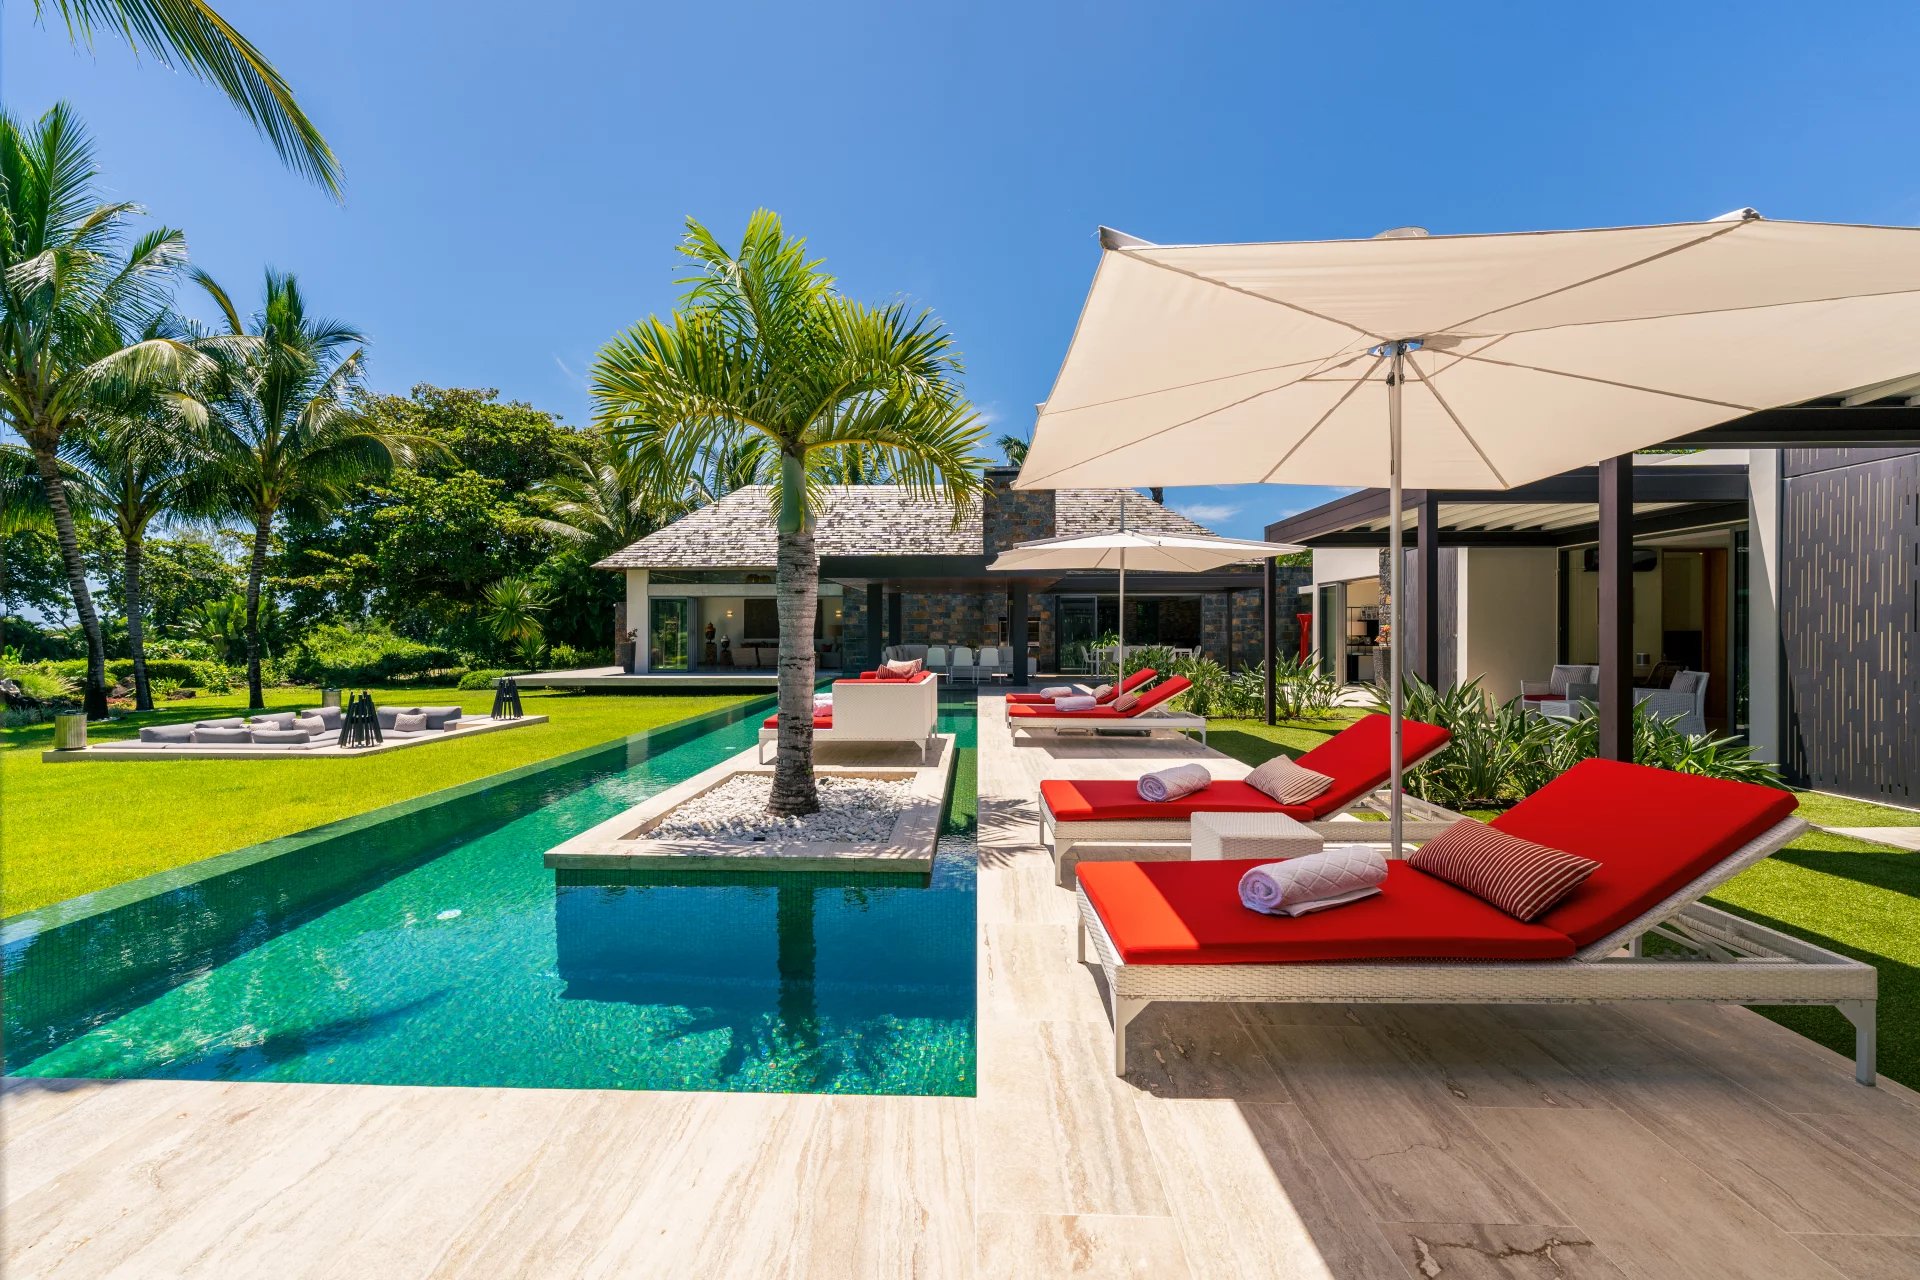 Beau Champ - Mauritius - House, 6 rooms, 3 bedrooms - Slideshow Picture 1